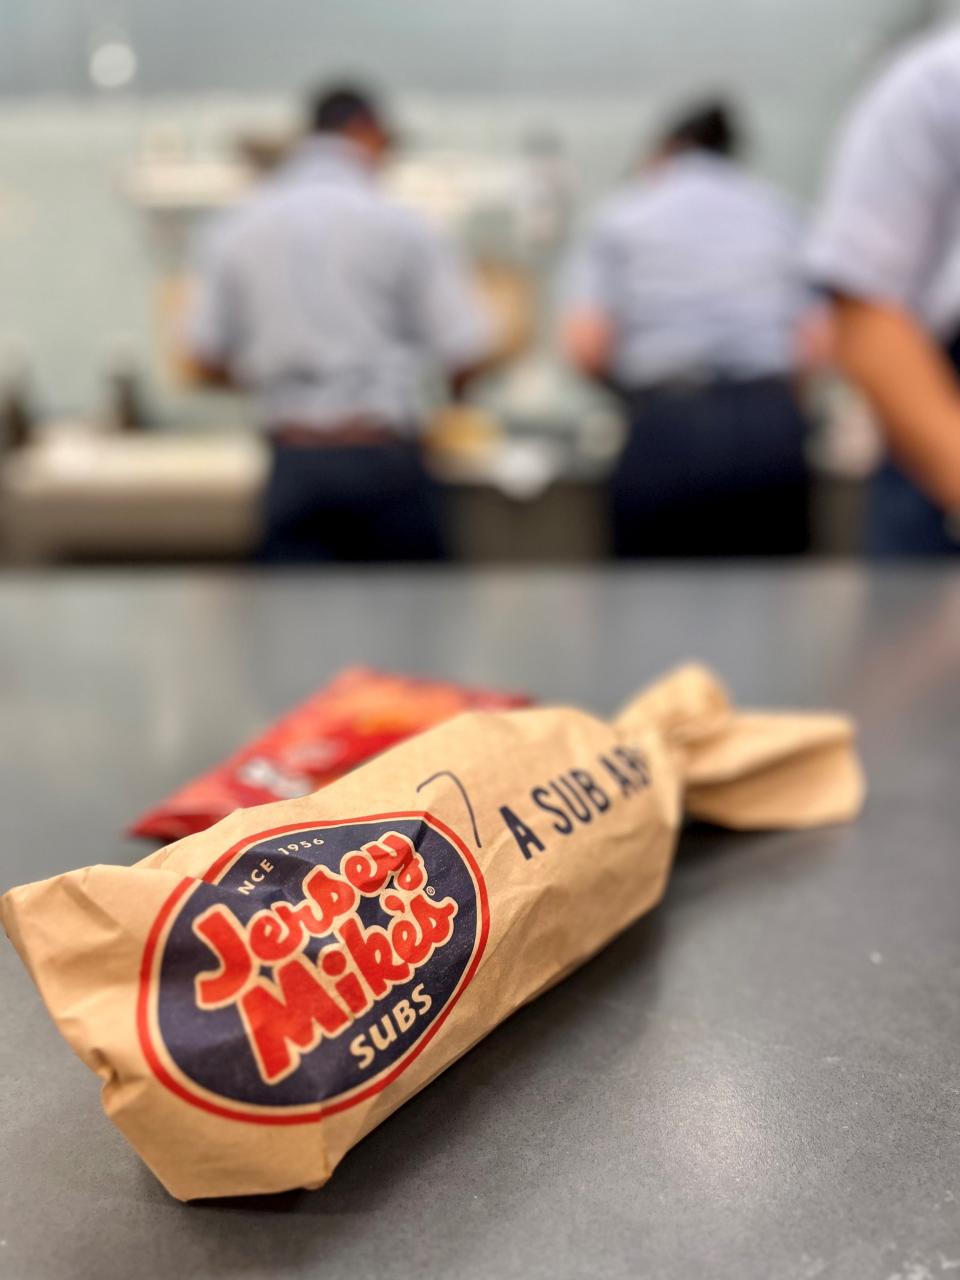 Jersey Mike’s is known for quality meats and cheeses sliced to order and fresh bread, baked in-store daily.